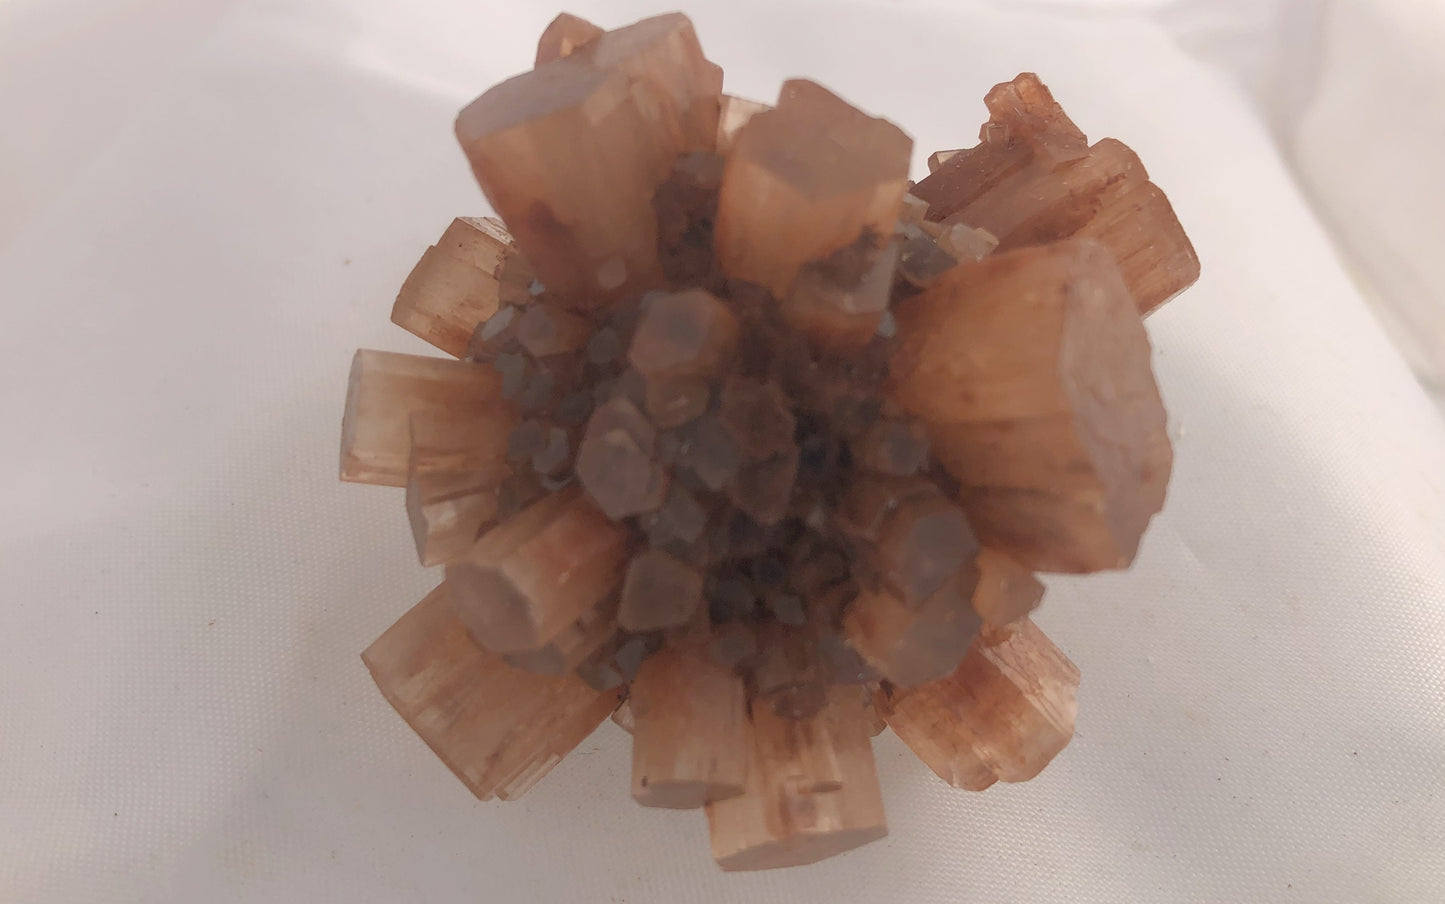 Aragonite Cluster 3 - Sephrou Province, Morocco | Of Coins & Crystals